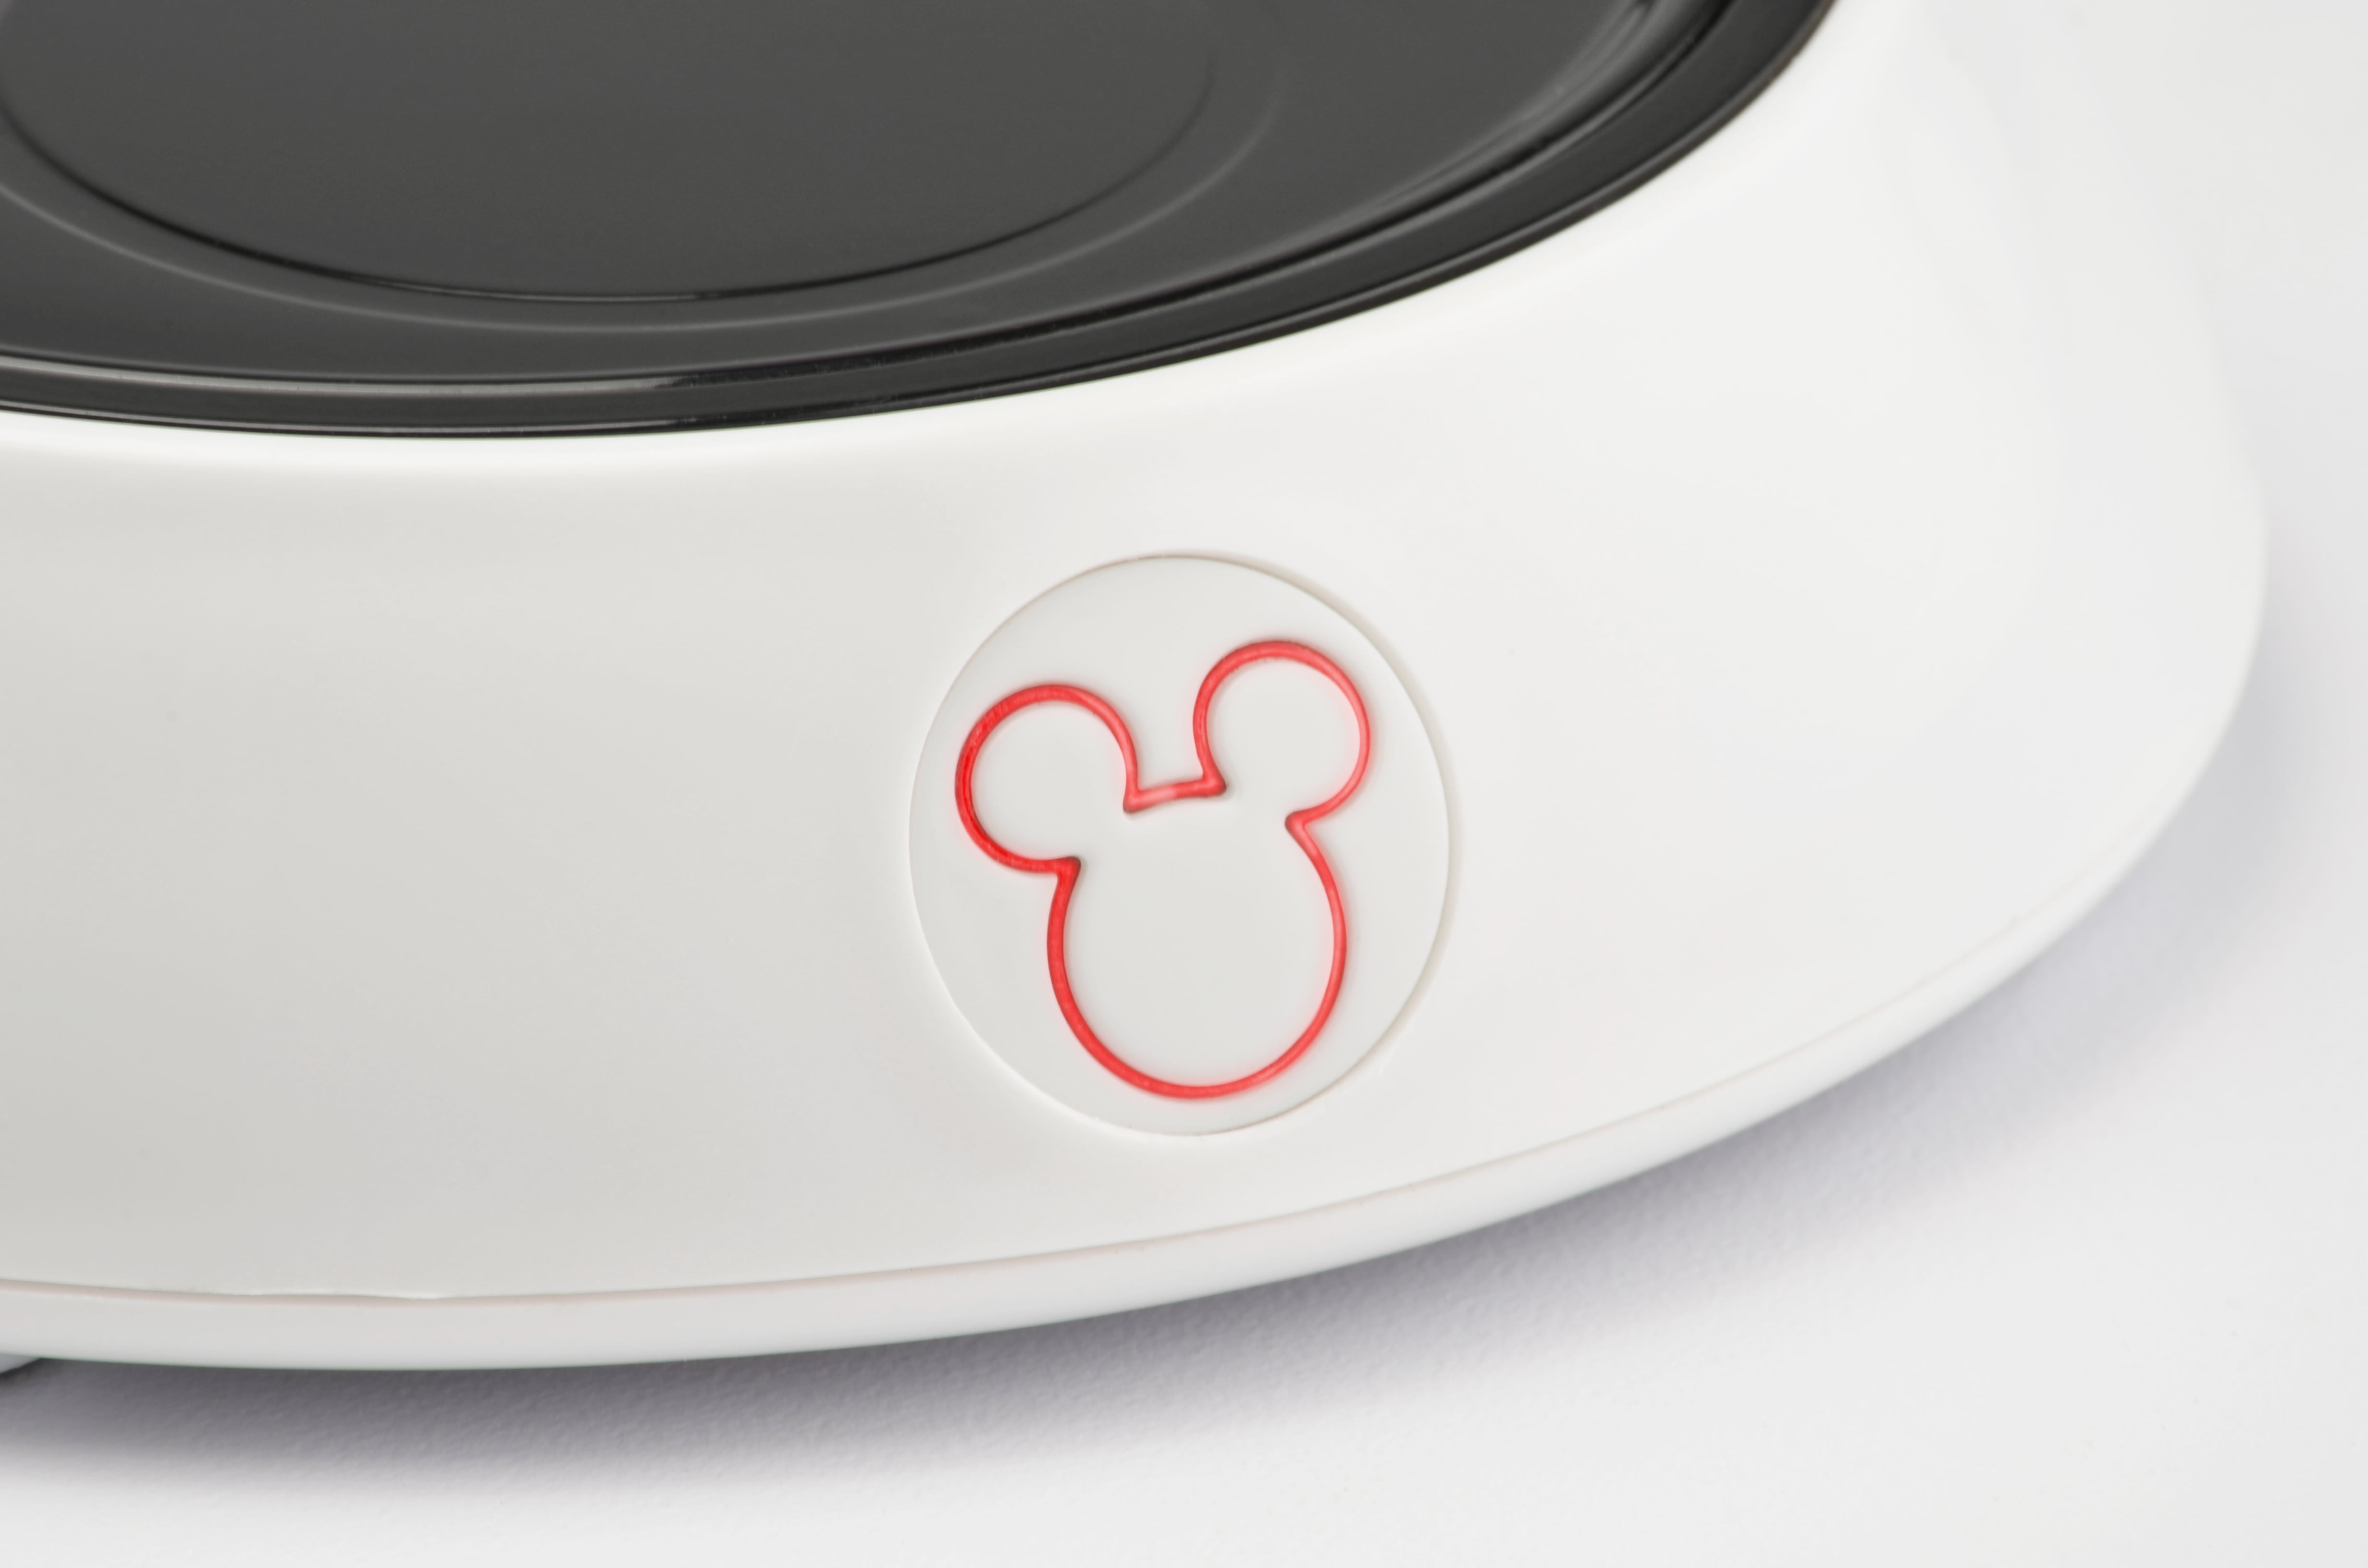 Disney Mickey Mouse Mug Warmer Just $8.99! Down From $33!